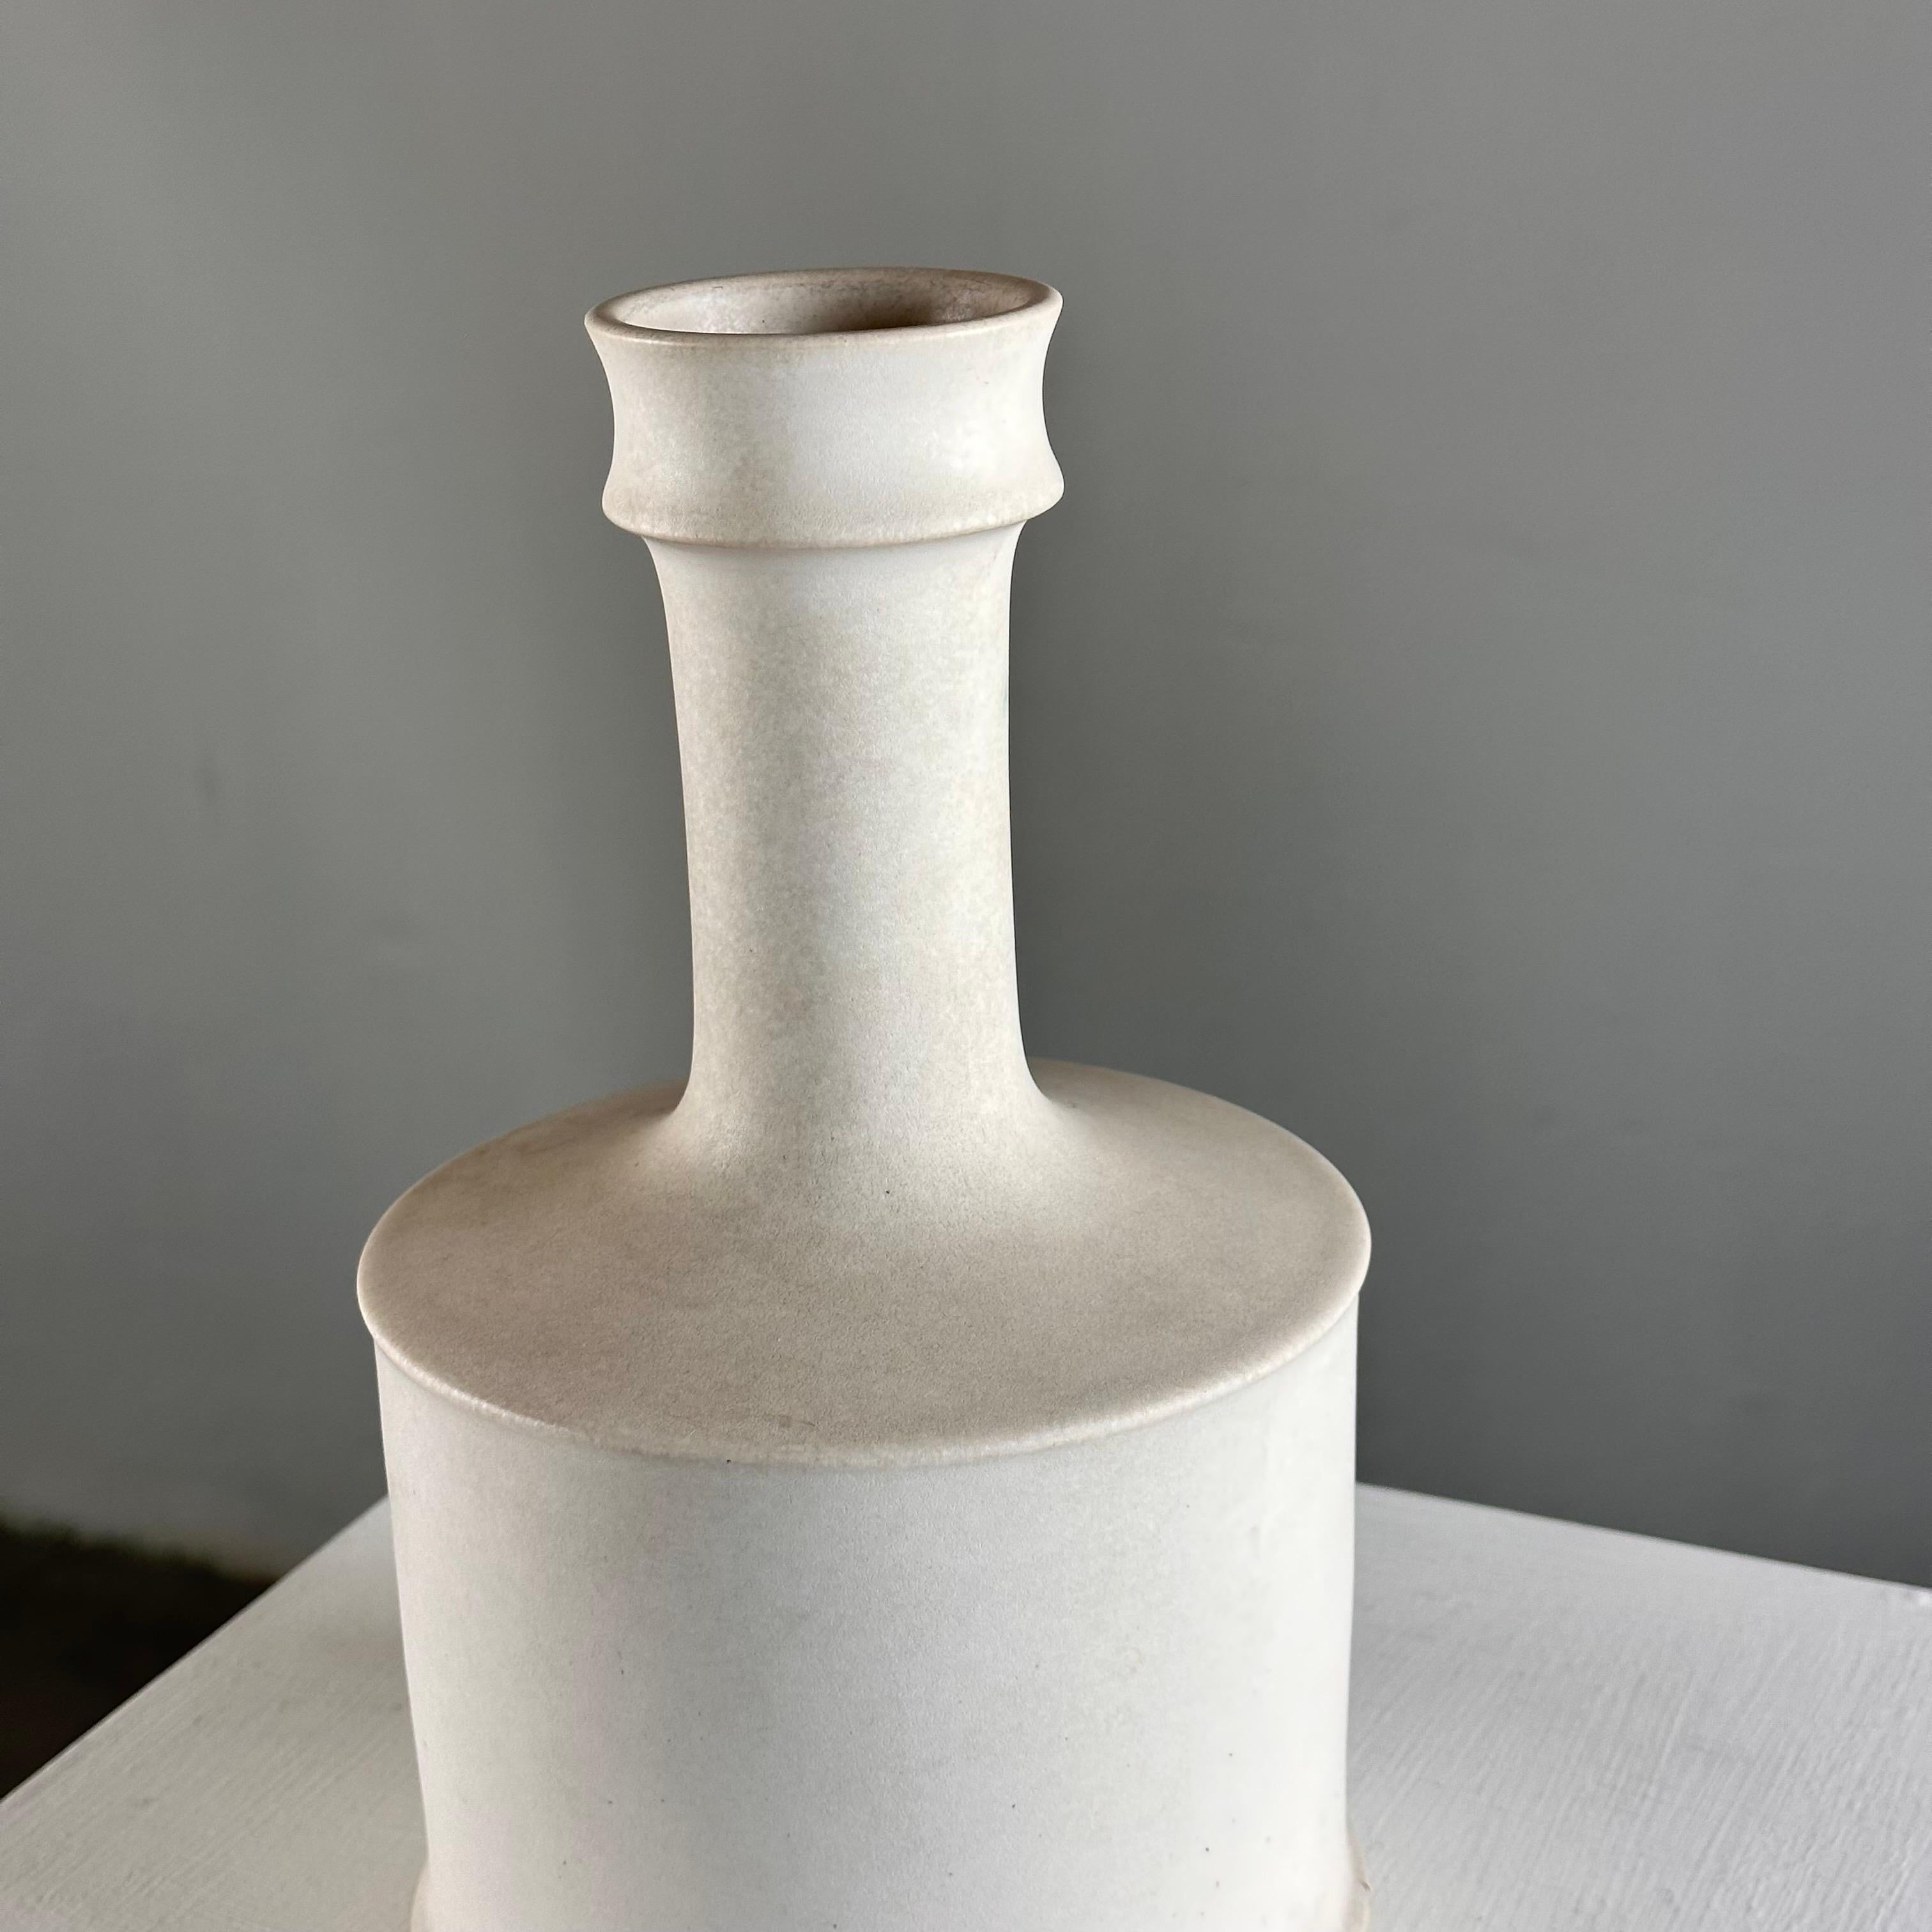 Hand-Crafted Ceramic Vase by Franco Bucci for Laboratorio Pesaro, 1960s For Sale